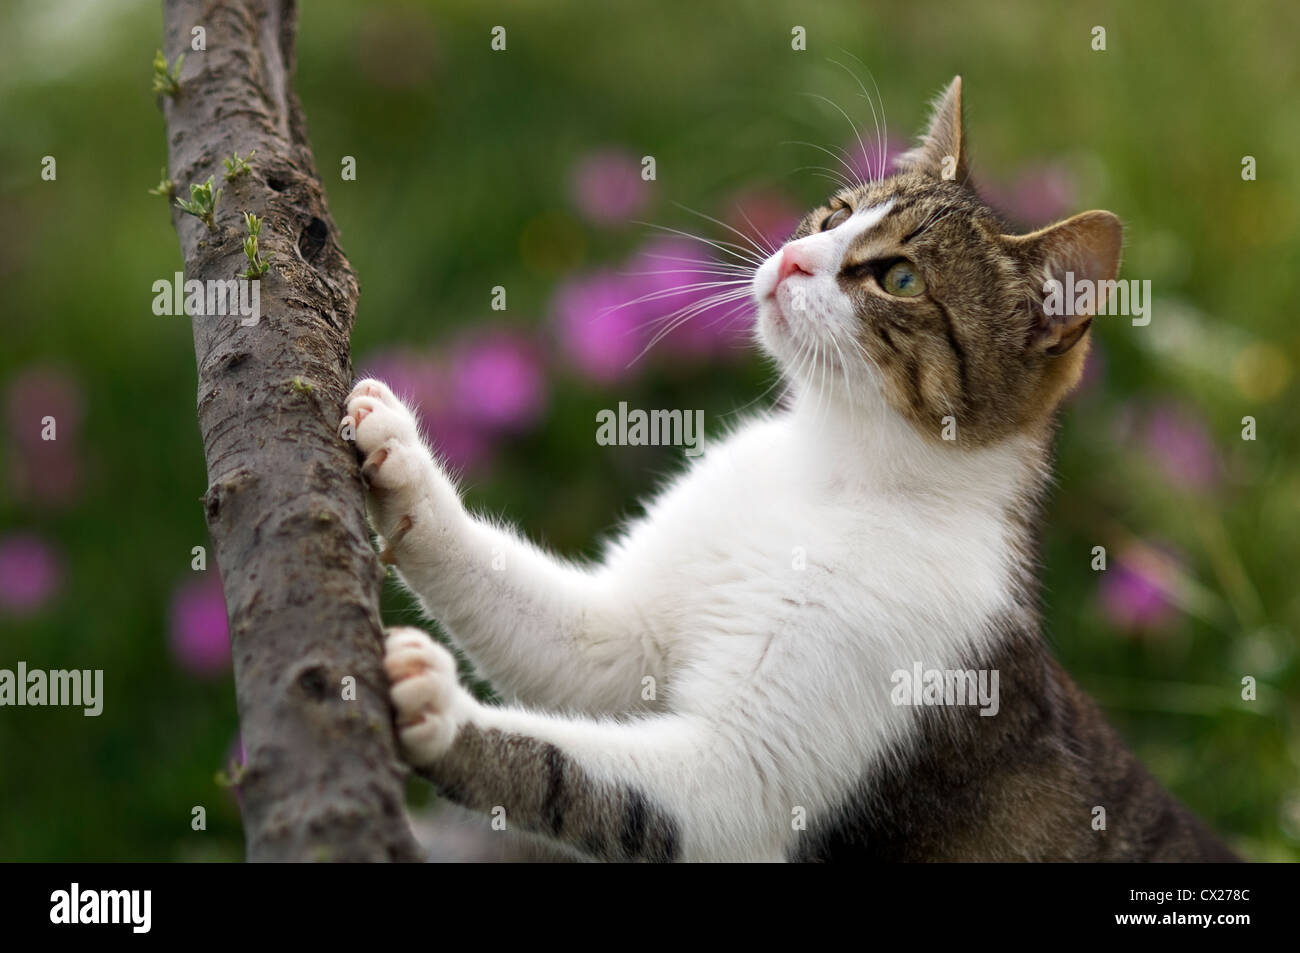 A tabby and white cat lurking underneath a tree Stock Photo